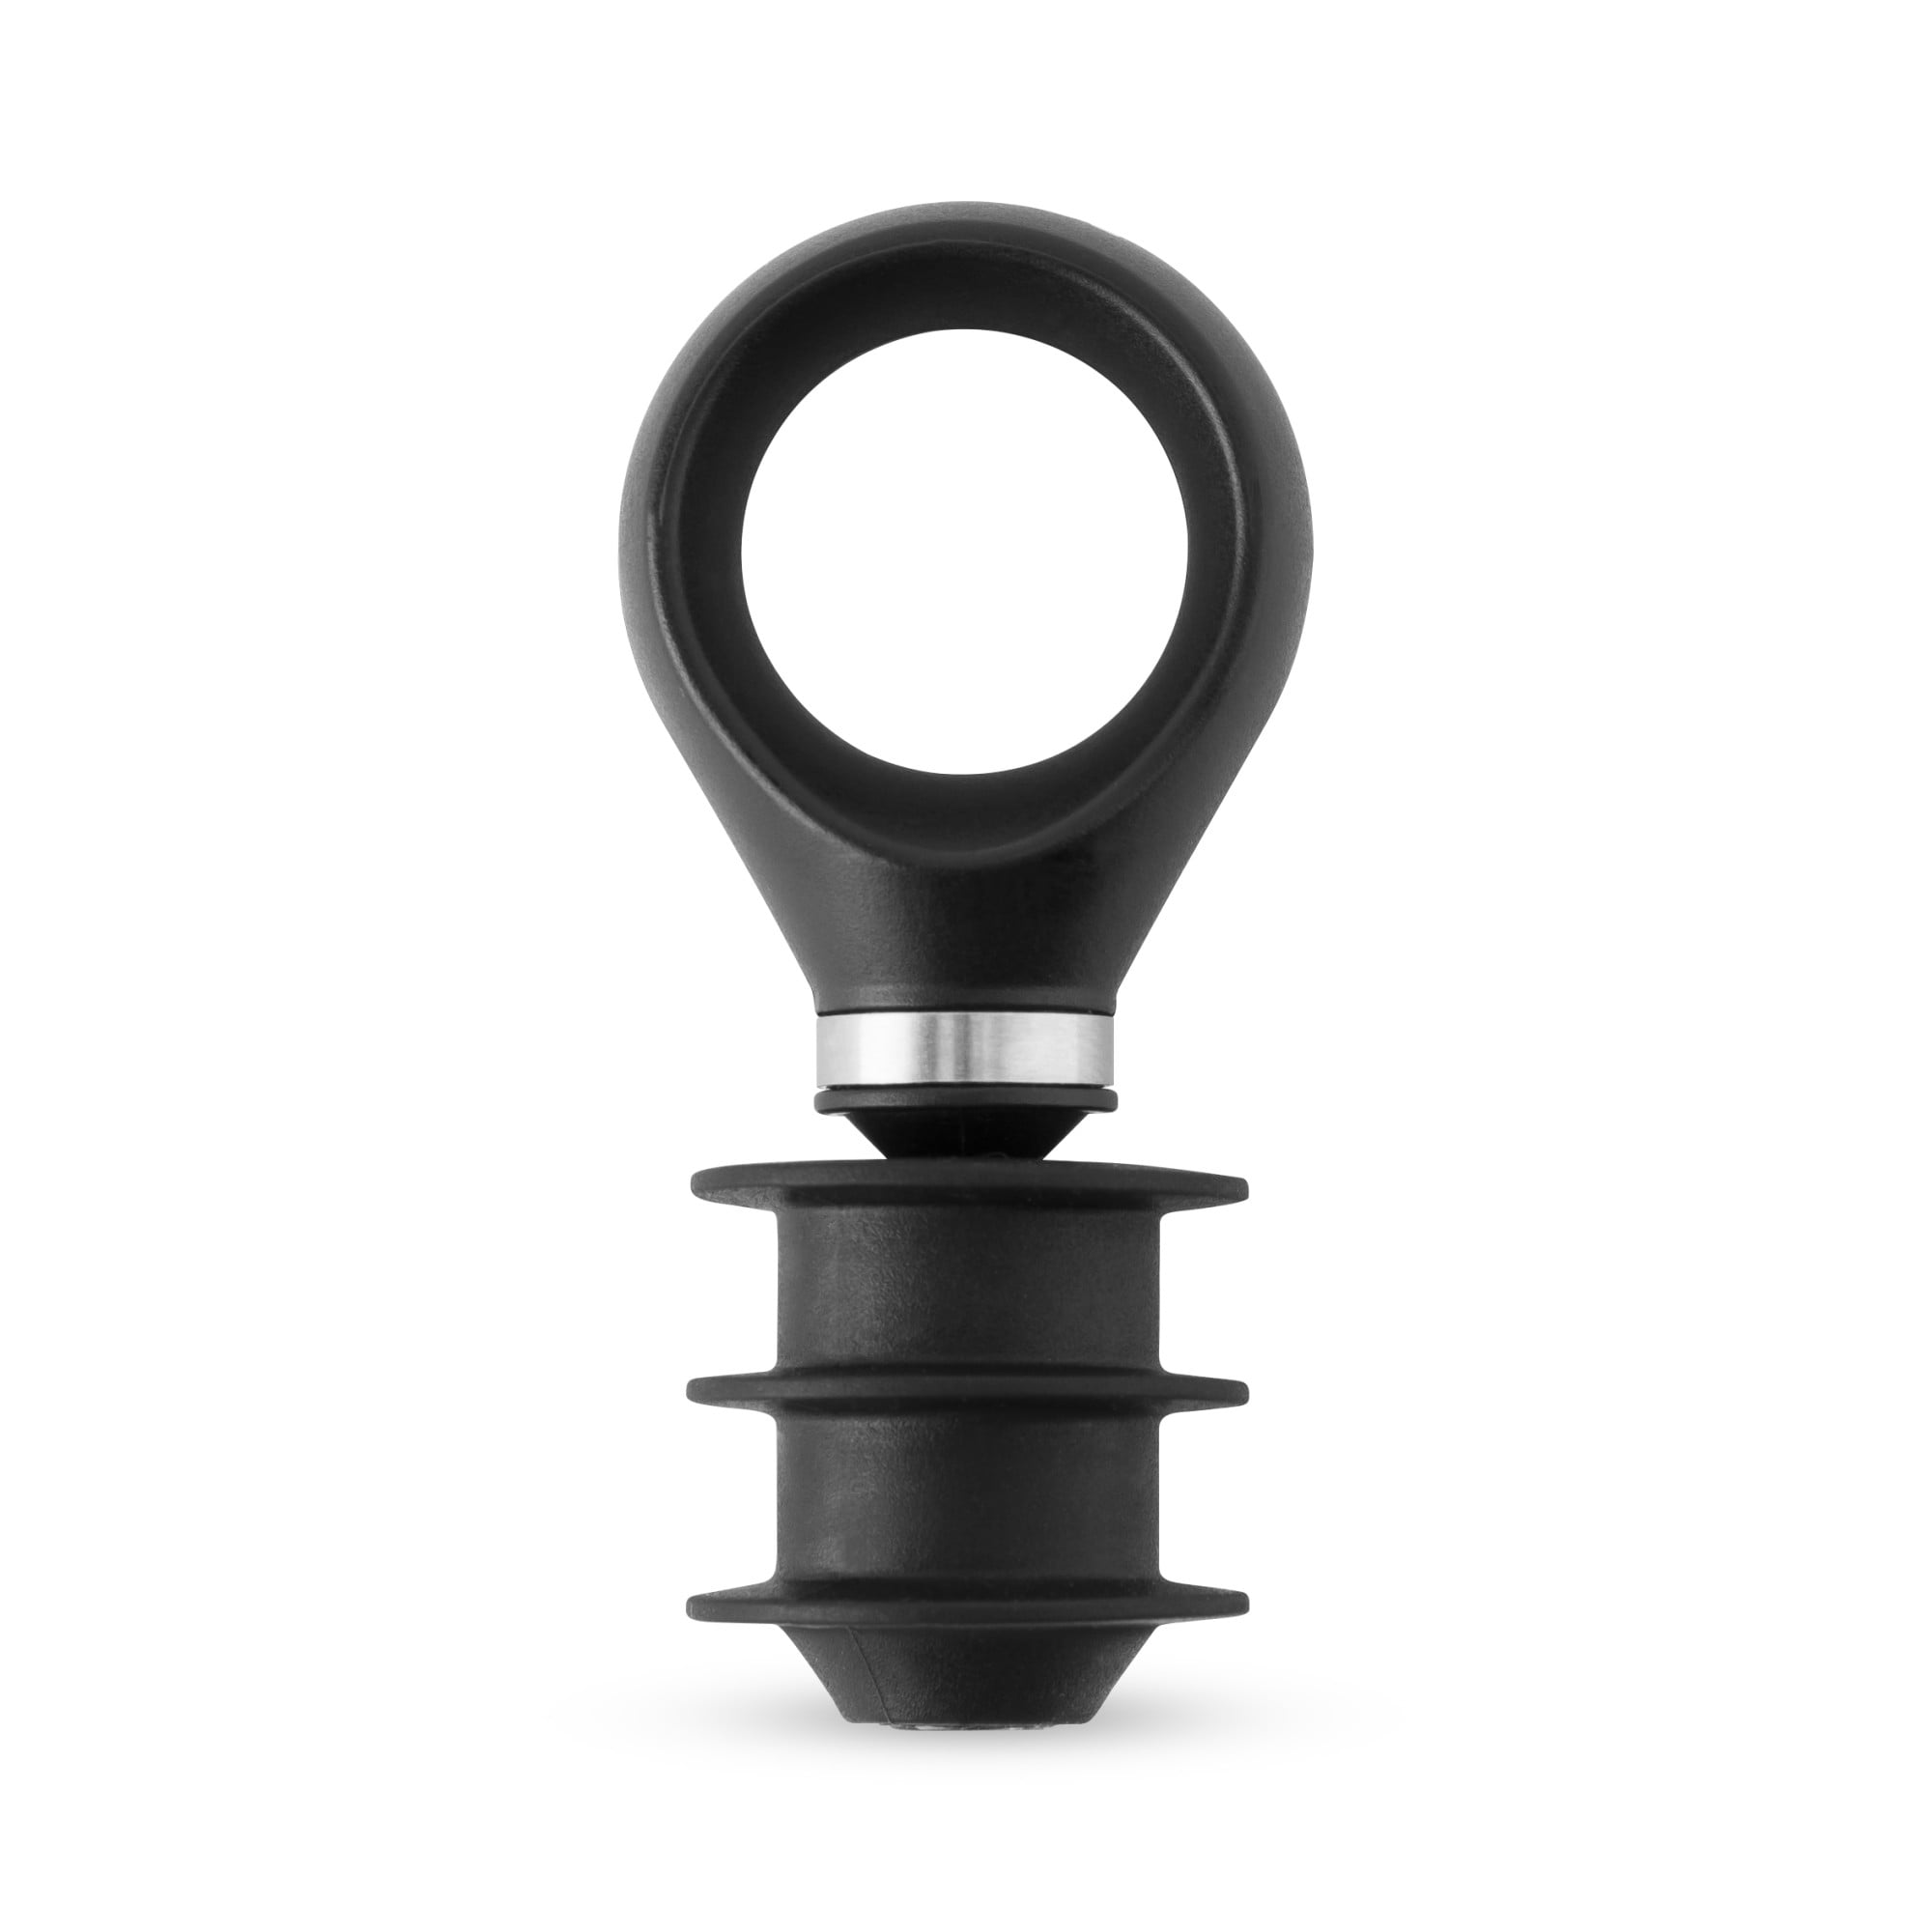 OXO Good Grips Silicone Bottle Stoppers 3 Pack by World Market